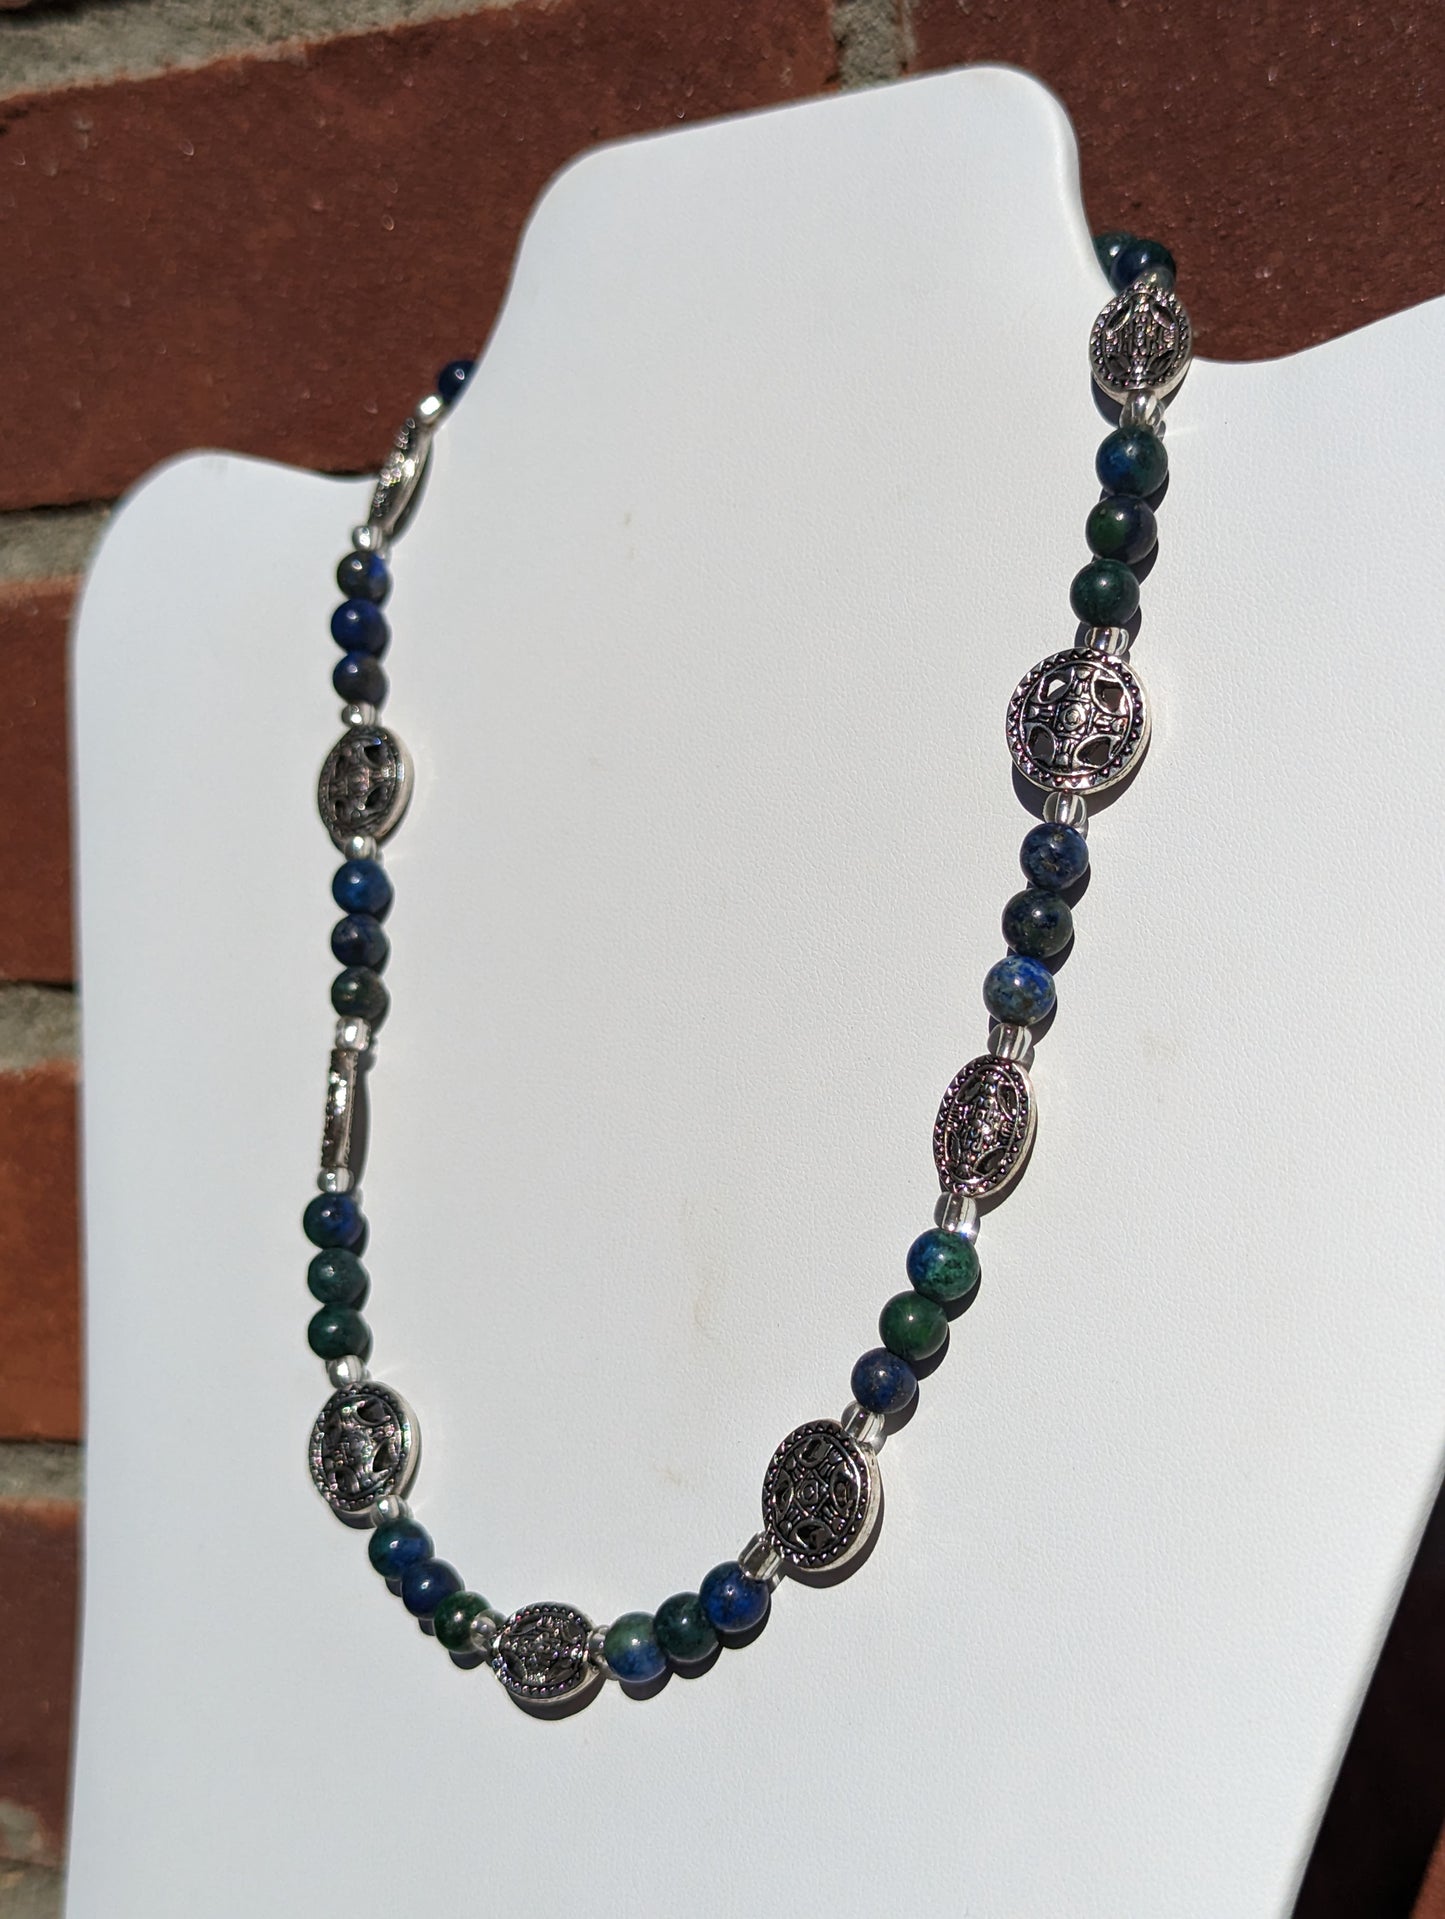 Chyrsocolla Necklace with Antique Silver Shield Beads